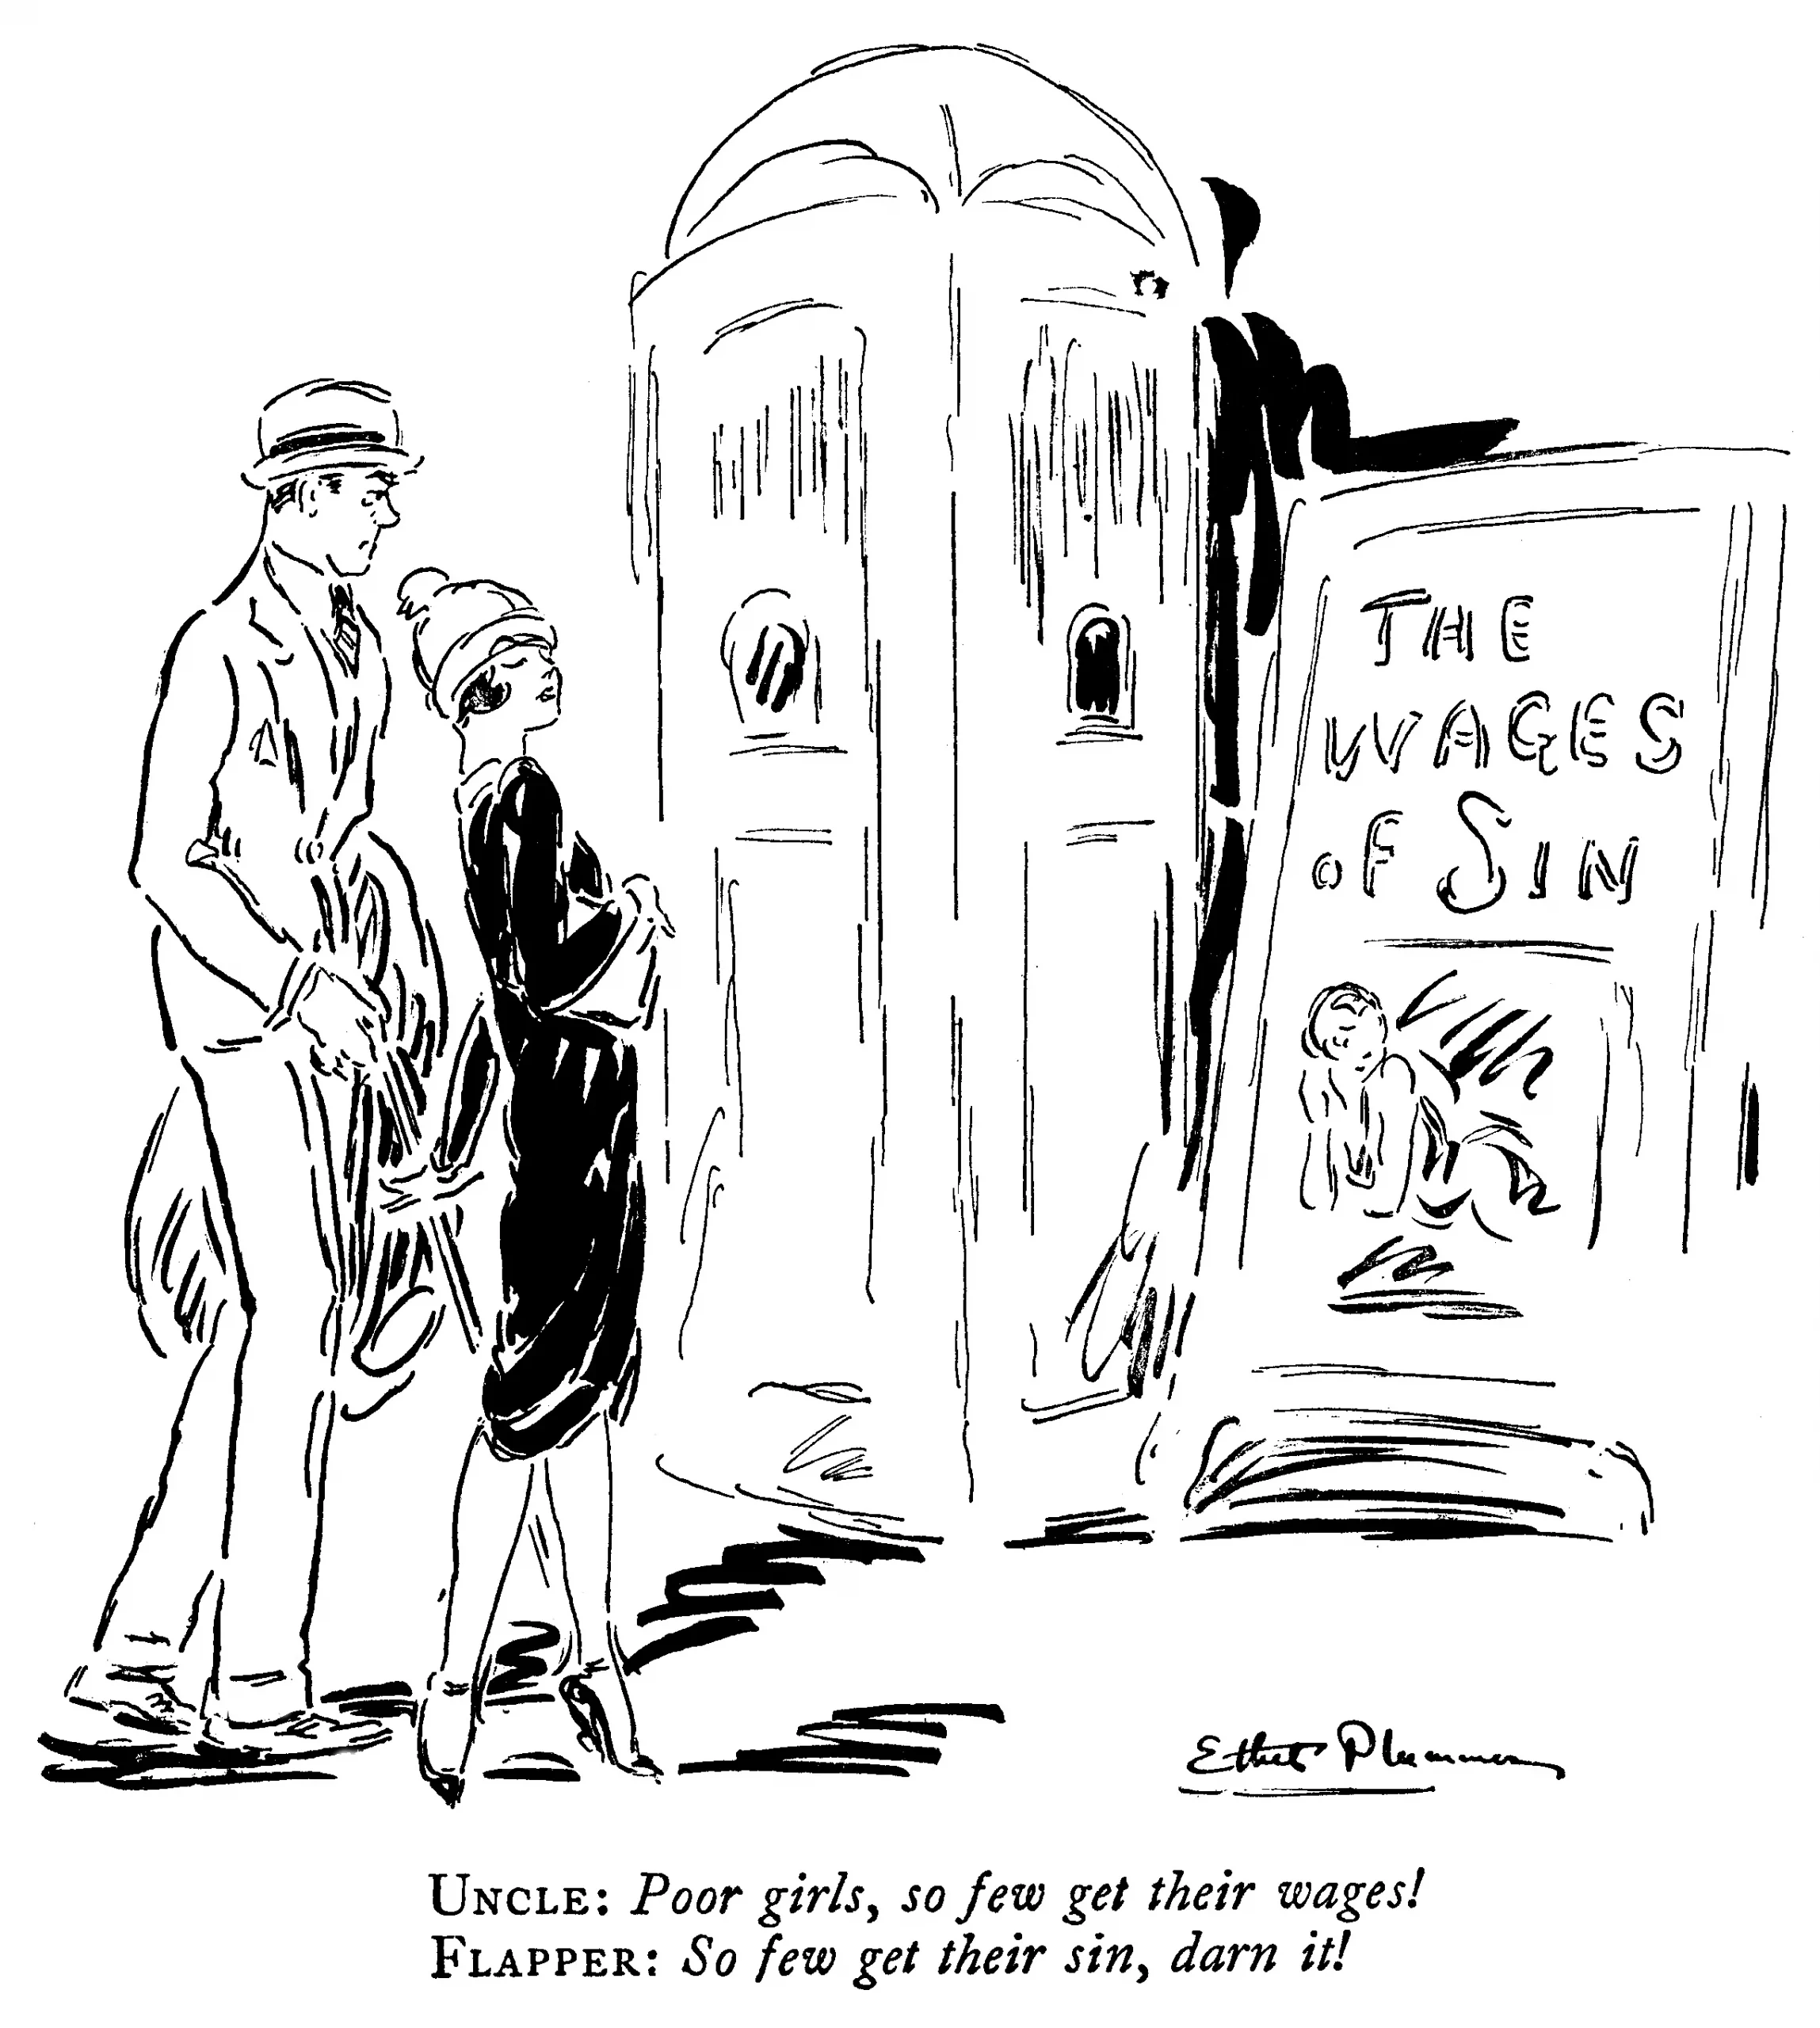 A cartoon by Ethel Plummer of The New Yorker. The cartoon shows a man and a flapper woman staring at a sign that says The Wages of Sin. The man notes that women rarely get their wages. The woman notes that women rarely get their sin.